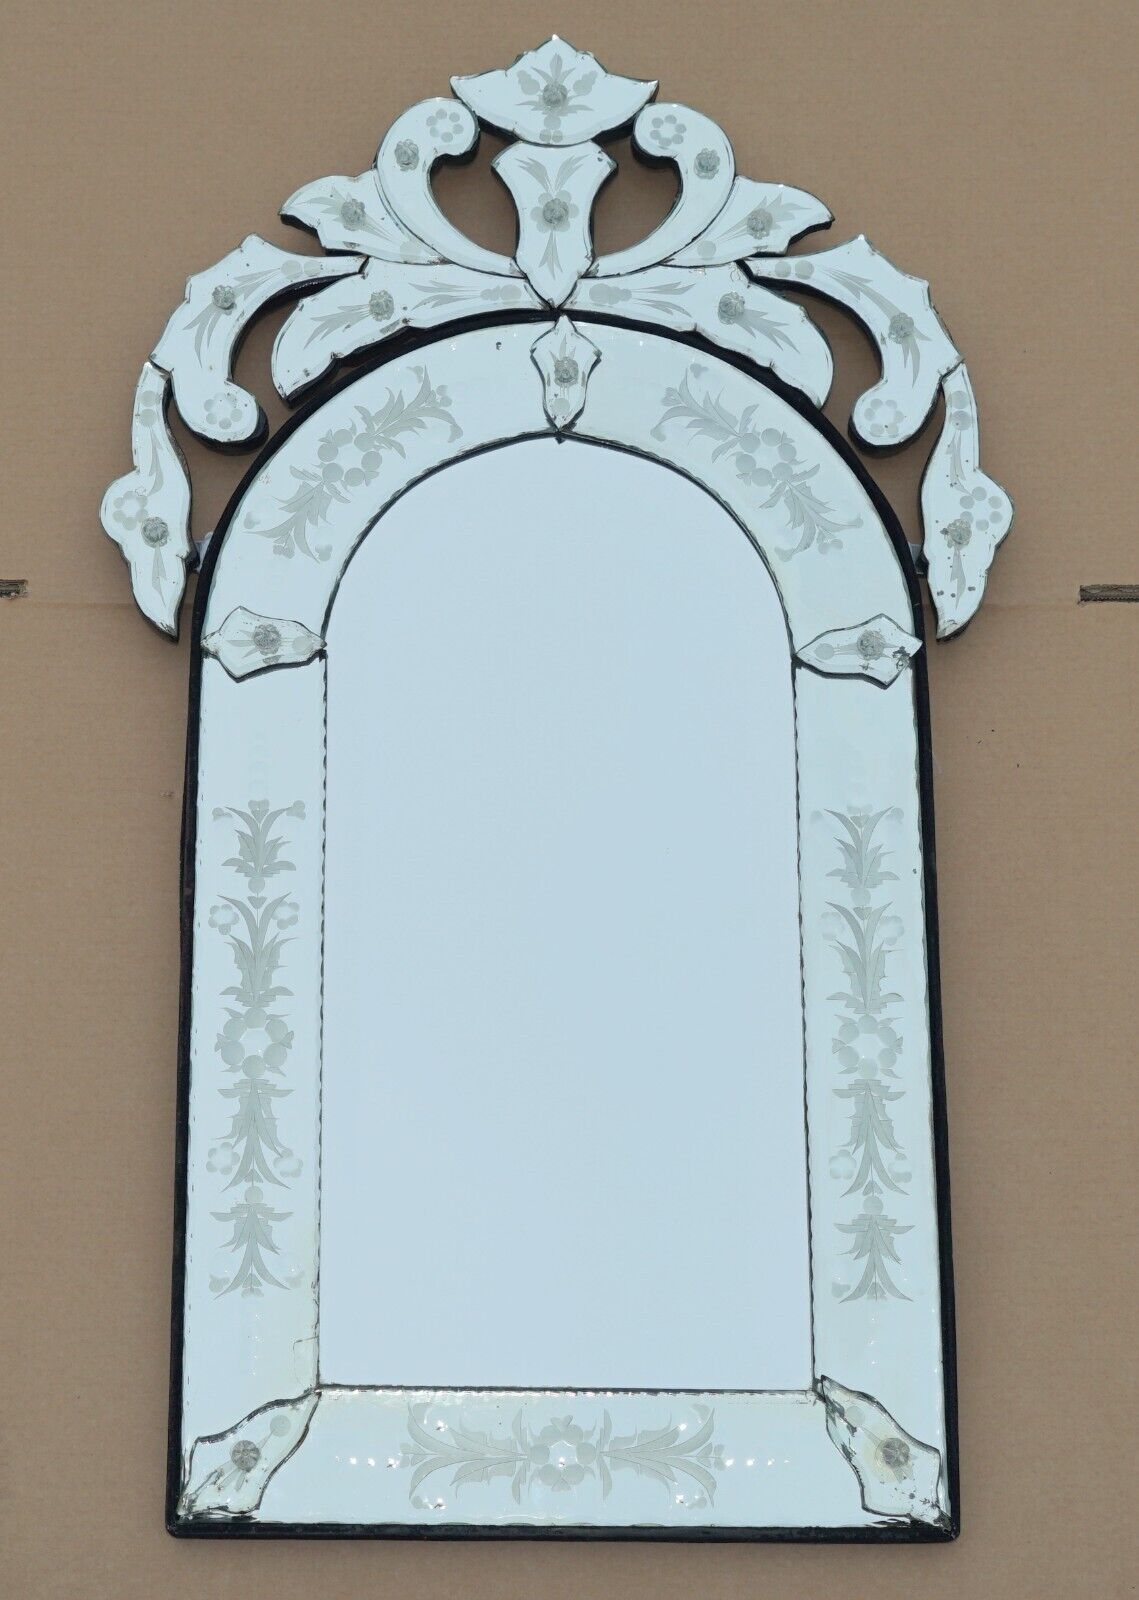 STUNNING ANTIQUE CIRCA 1910 VENETIAN ETCHED GLASS DOMED TOP WALL MIRROR